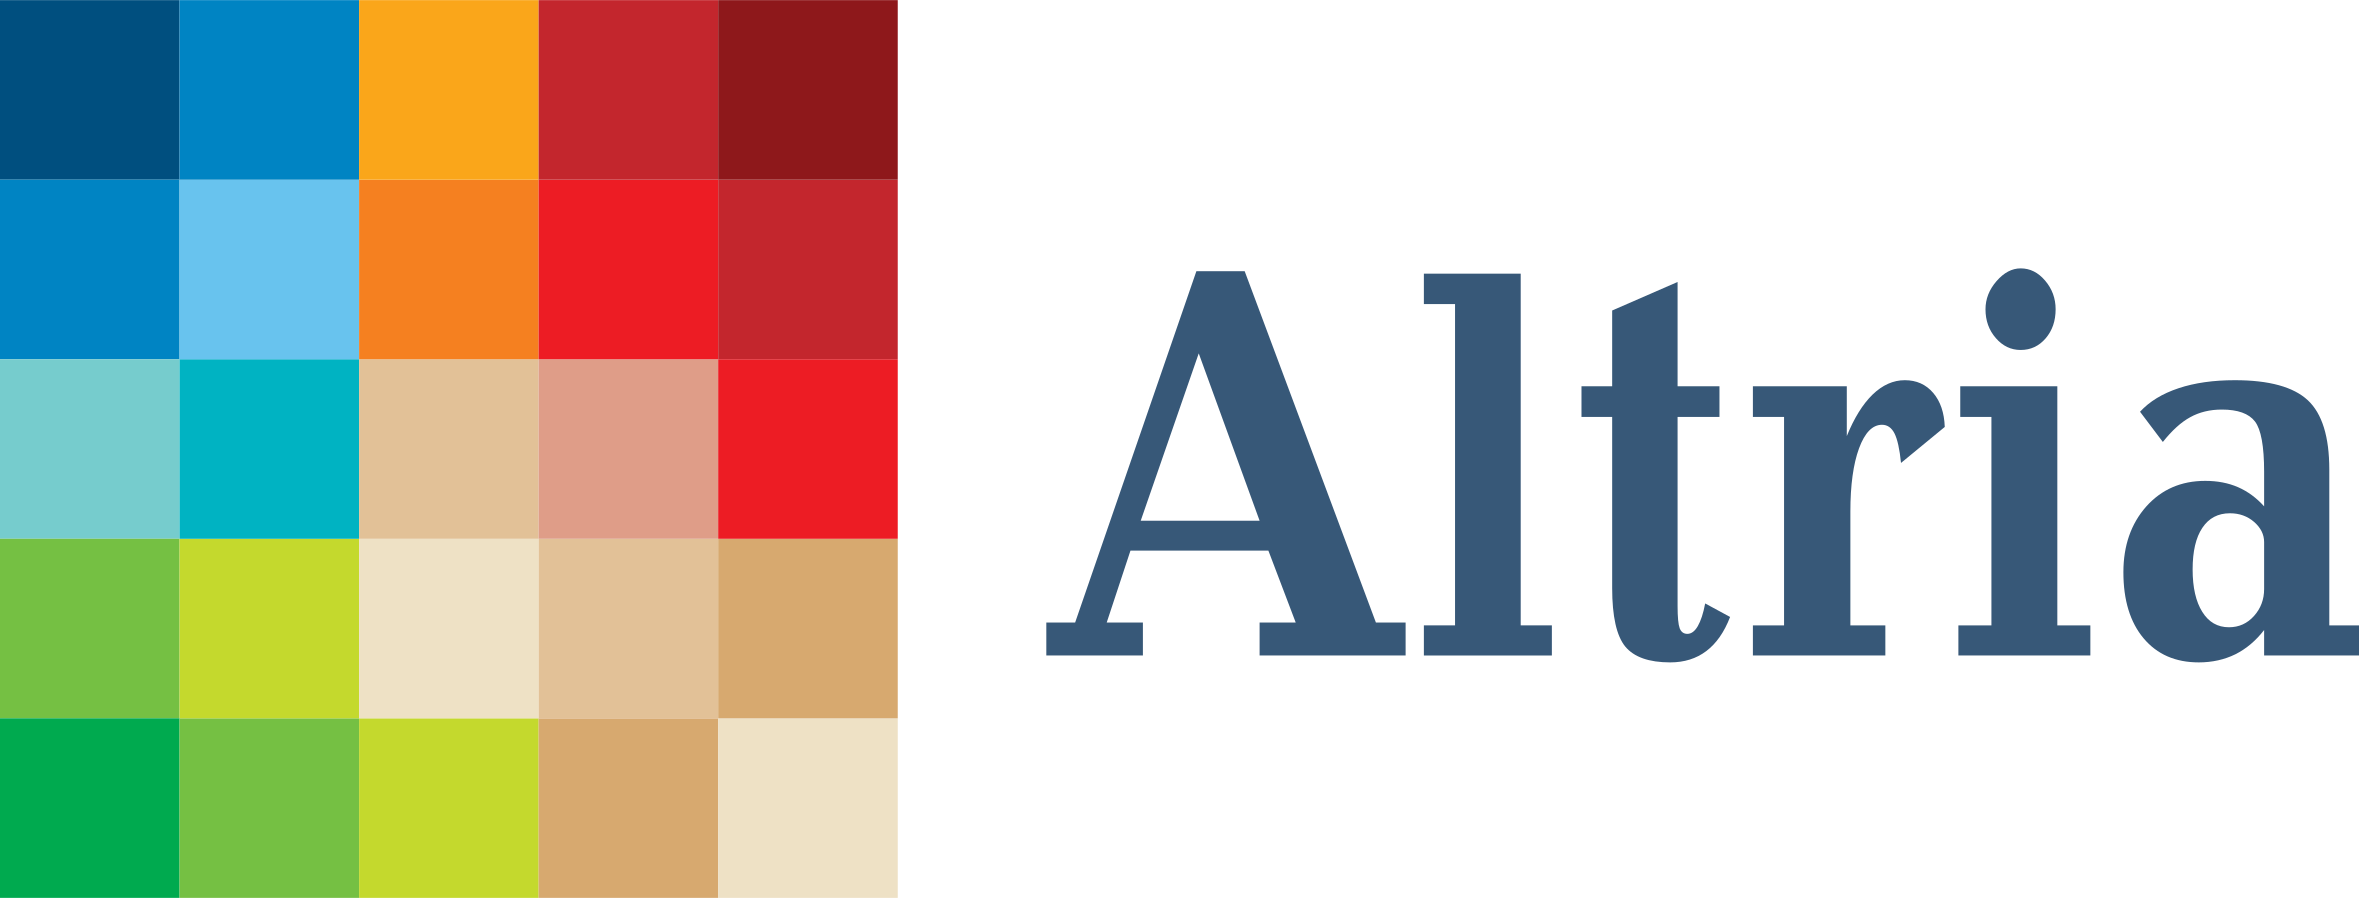 Altria Group Logo Free Download Image PNG Image